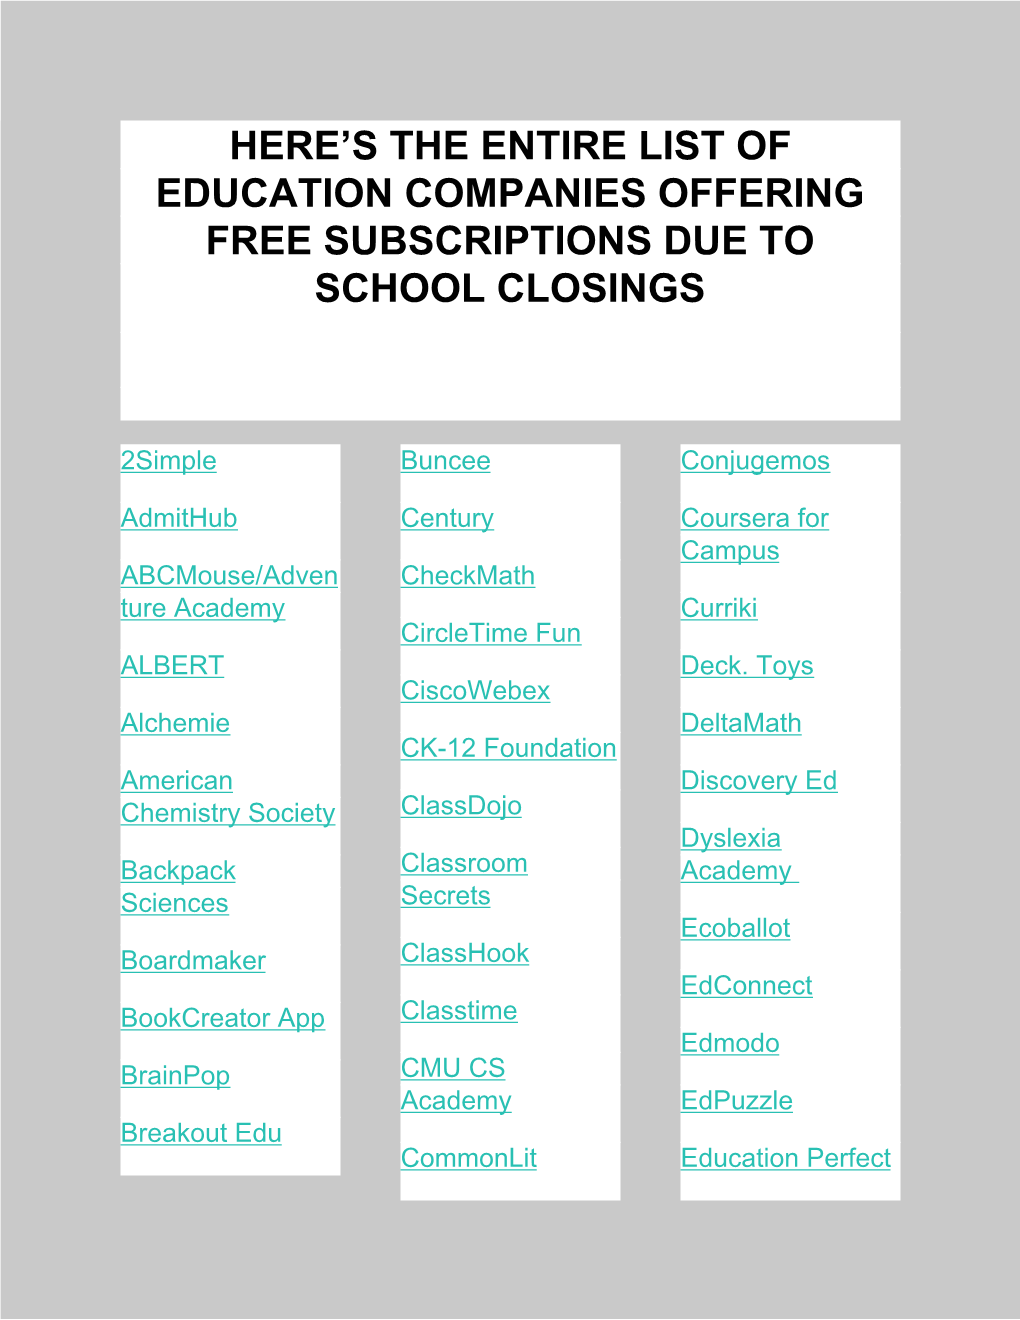 Here's the Entire List of Education Companies